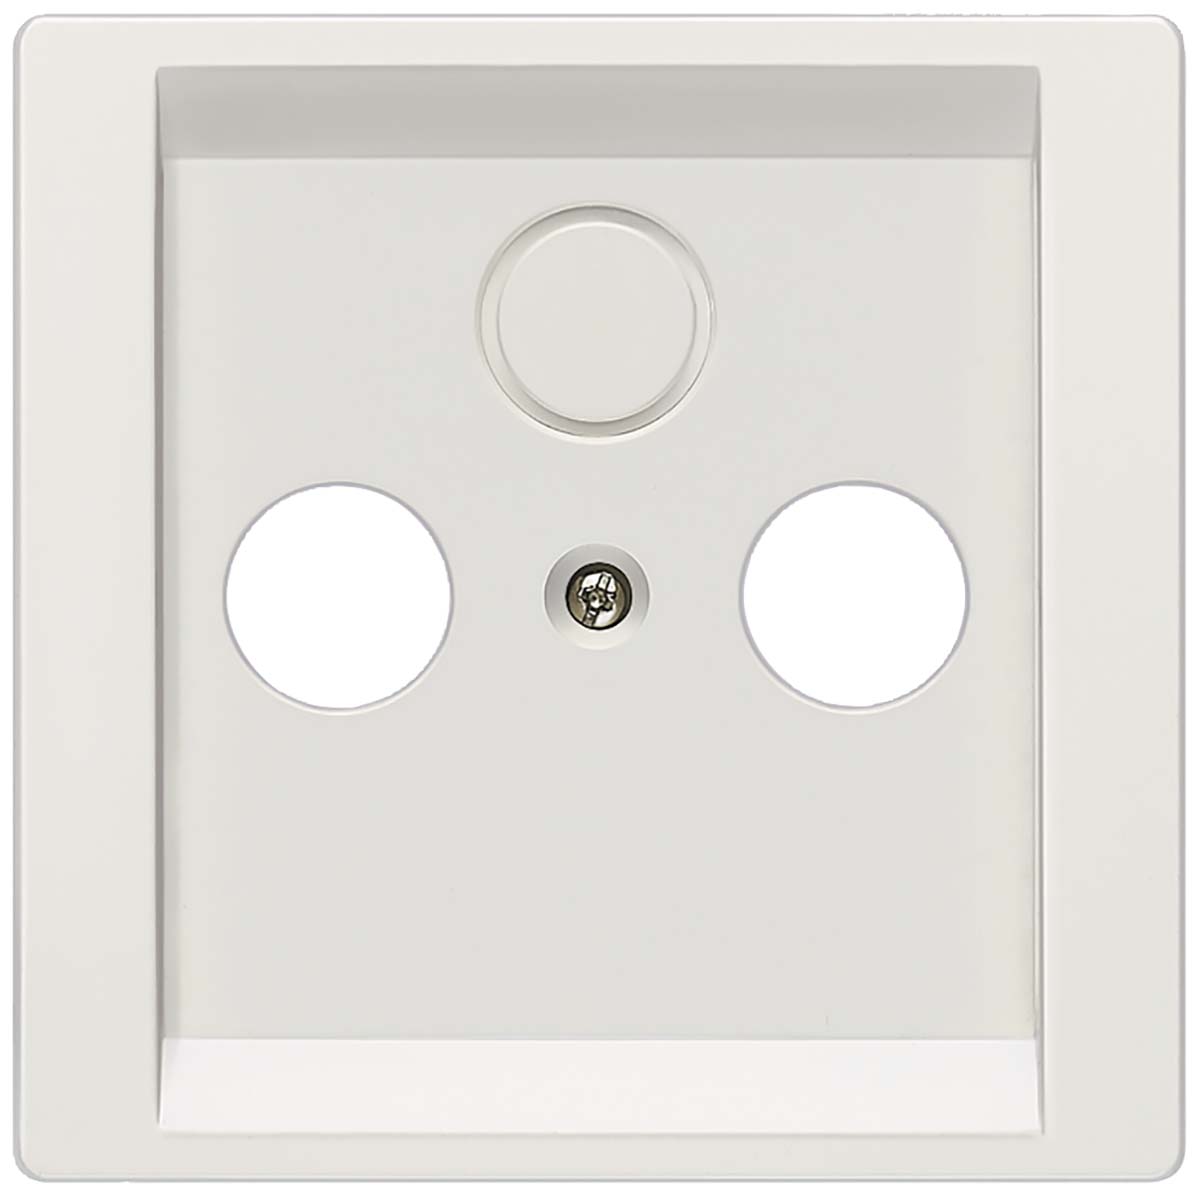 Siemens Thermoplastic Coaxial Cover Plate